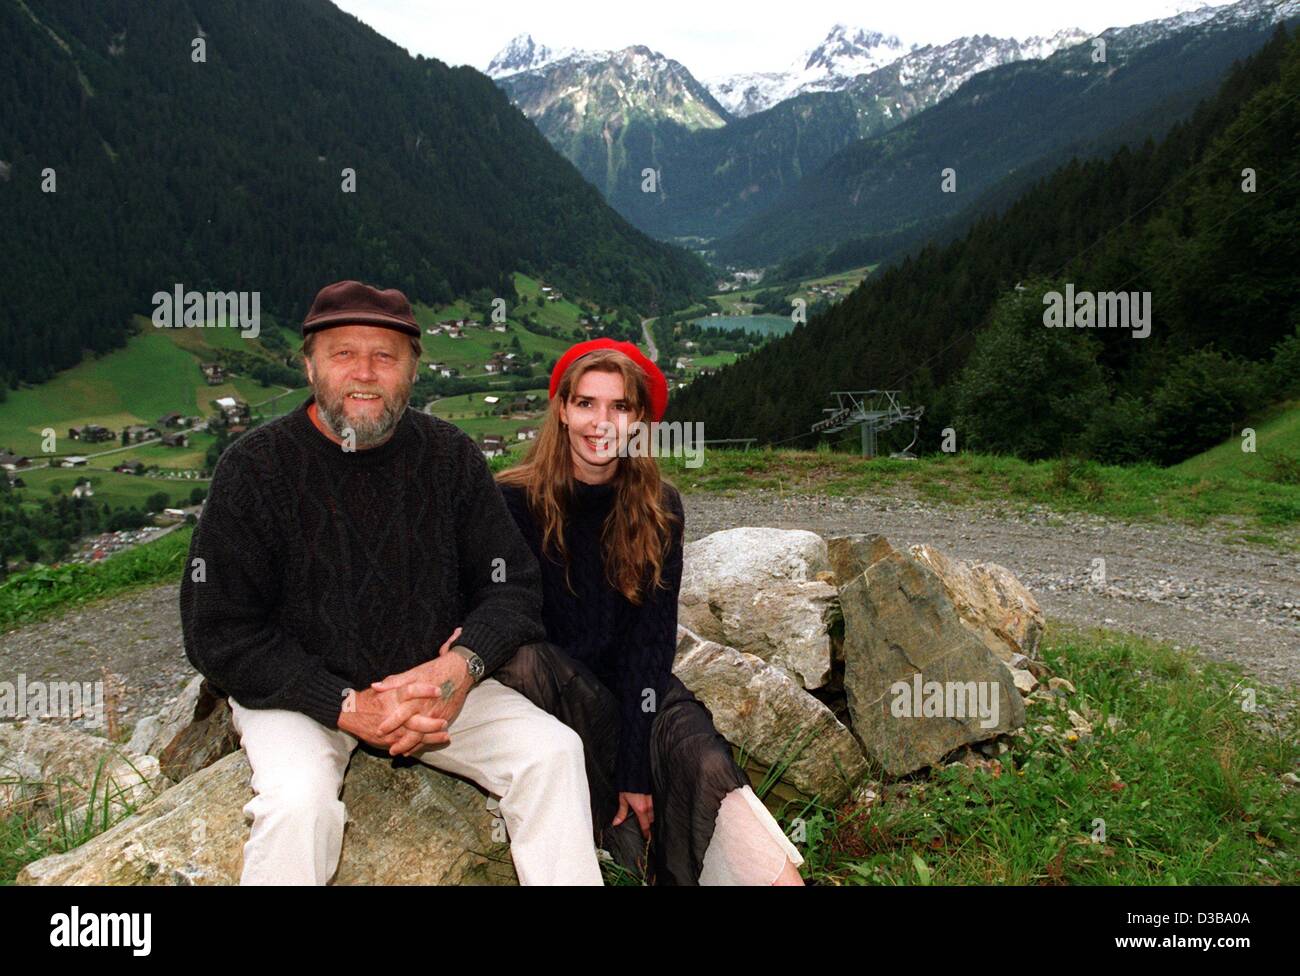 (dpa files) - German film director Joseph Vilsmaier and his wife, actress Dana Vavrova, pose in front of a mountain scene in Gaschurn, Austria, 10 September 1995. The couple came to Gaschurn for the premiere of their film 'Schlafes Bruder' (Brother of Sleep'), which was directed by Vilsmaier and sta Stock Photo